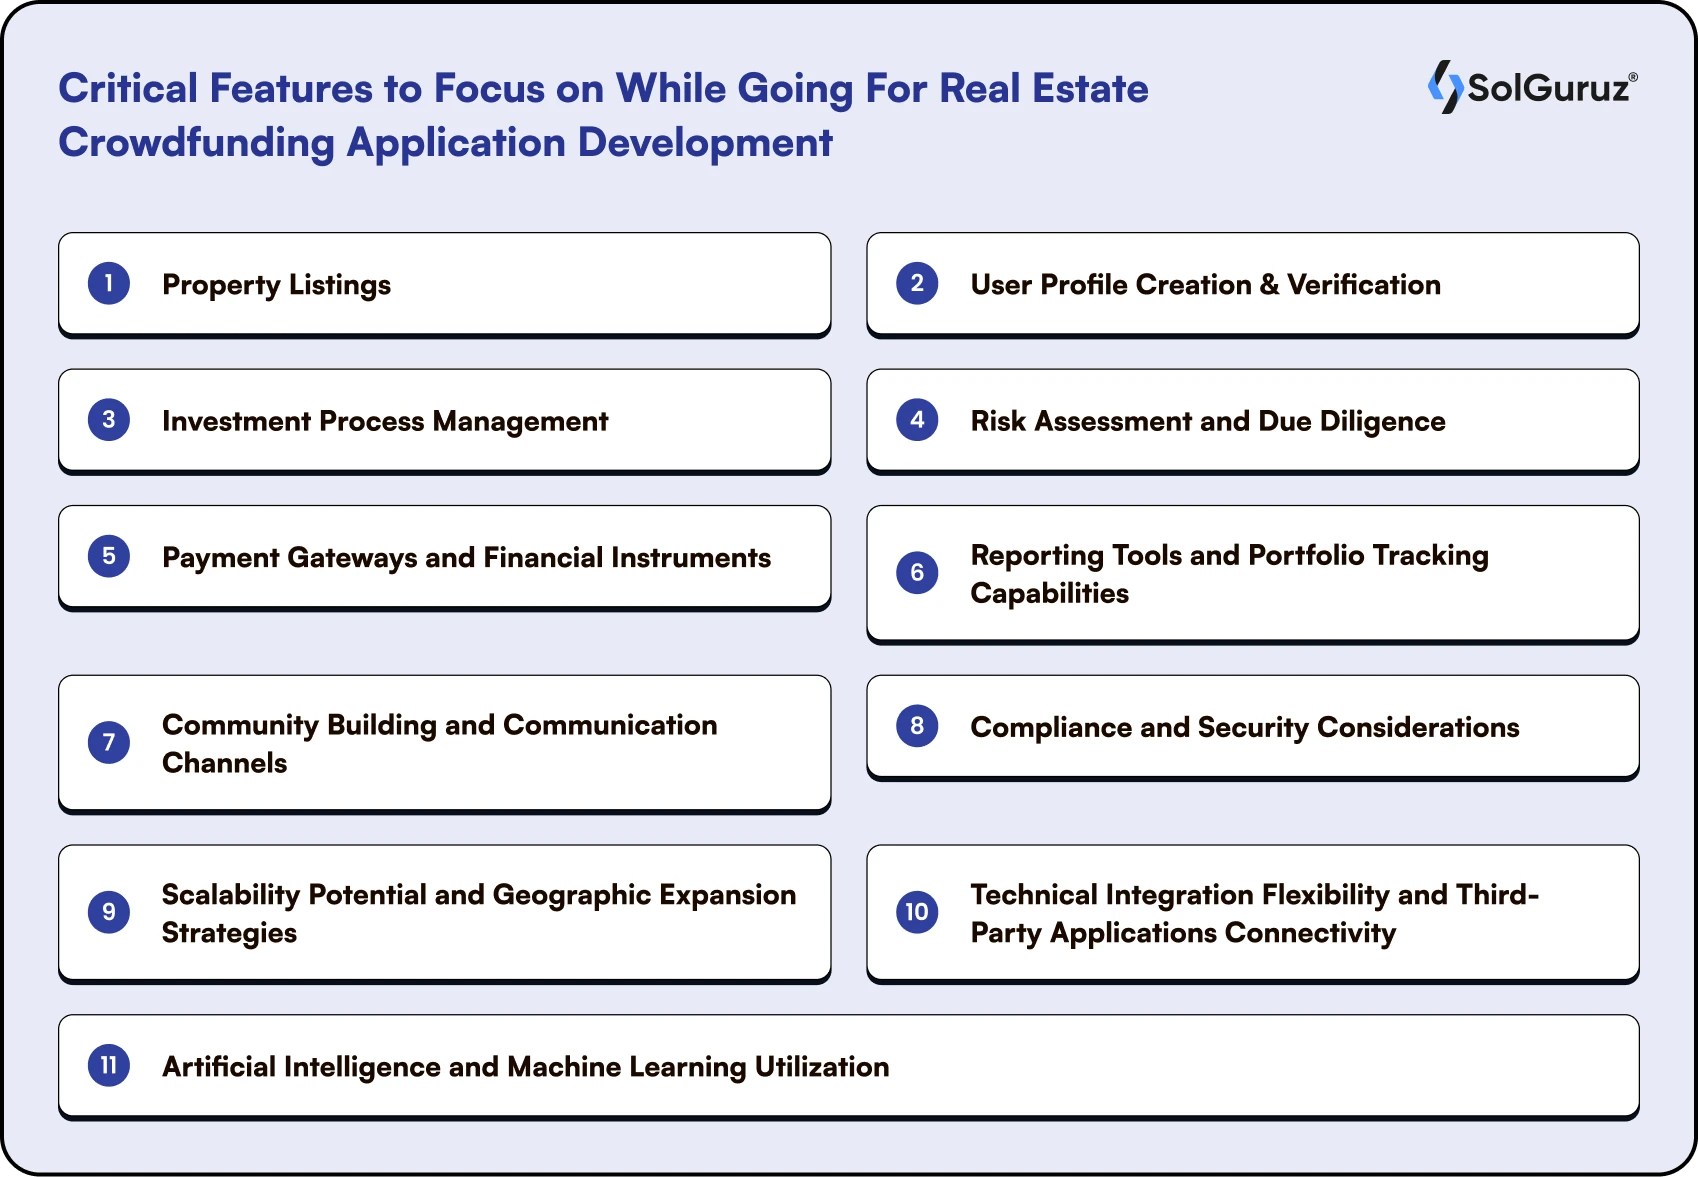 Critical Features to Focus on While Going For Real Estate Crowdfunding Application Development